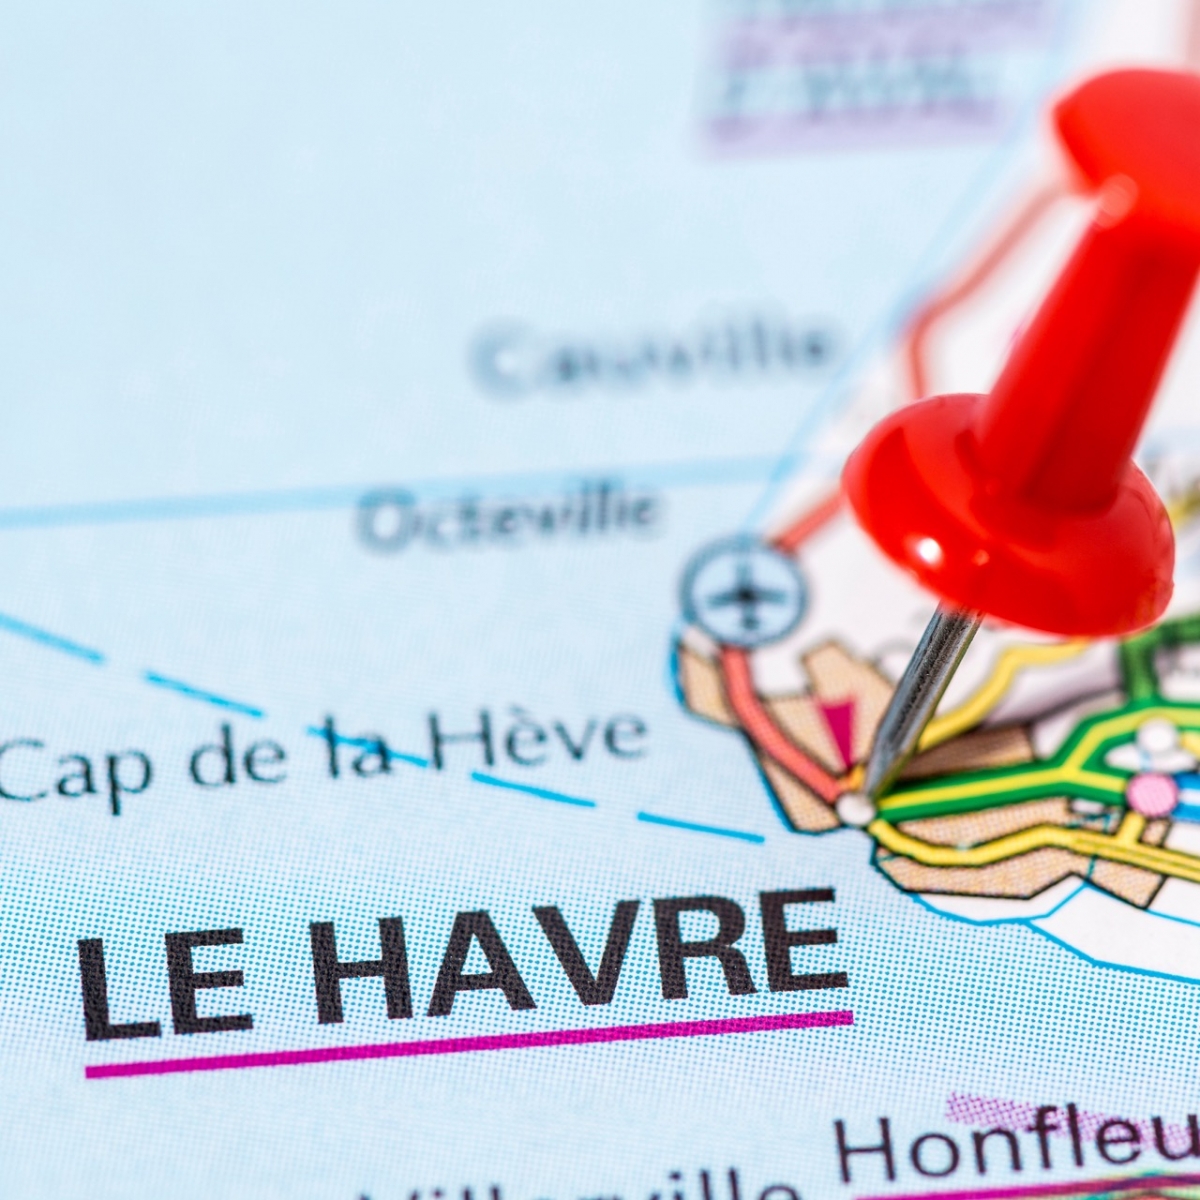 Le Havre, Normandy on the map